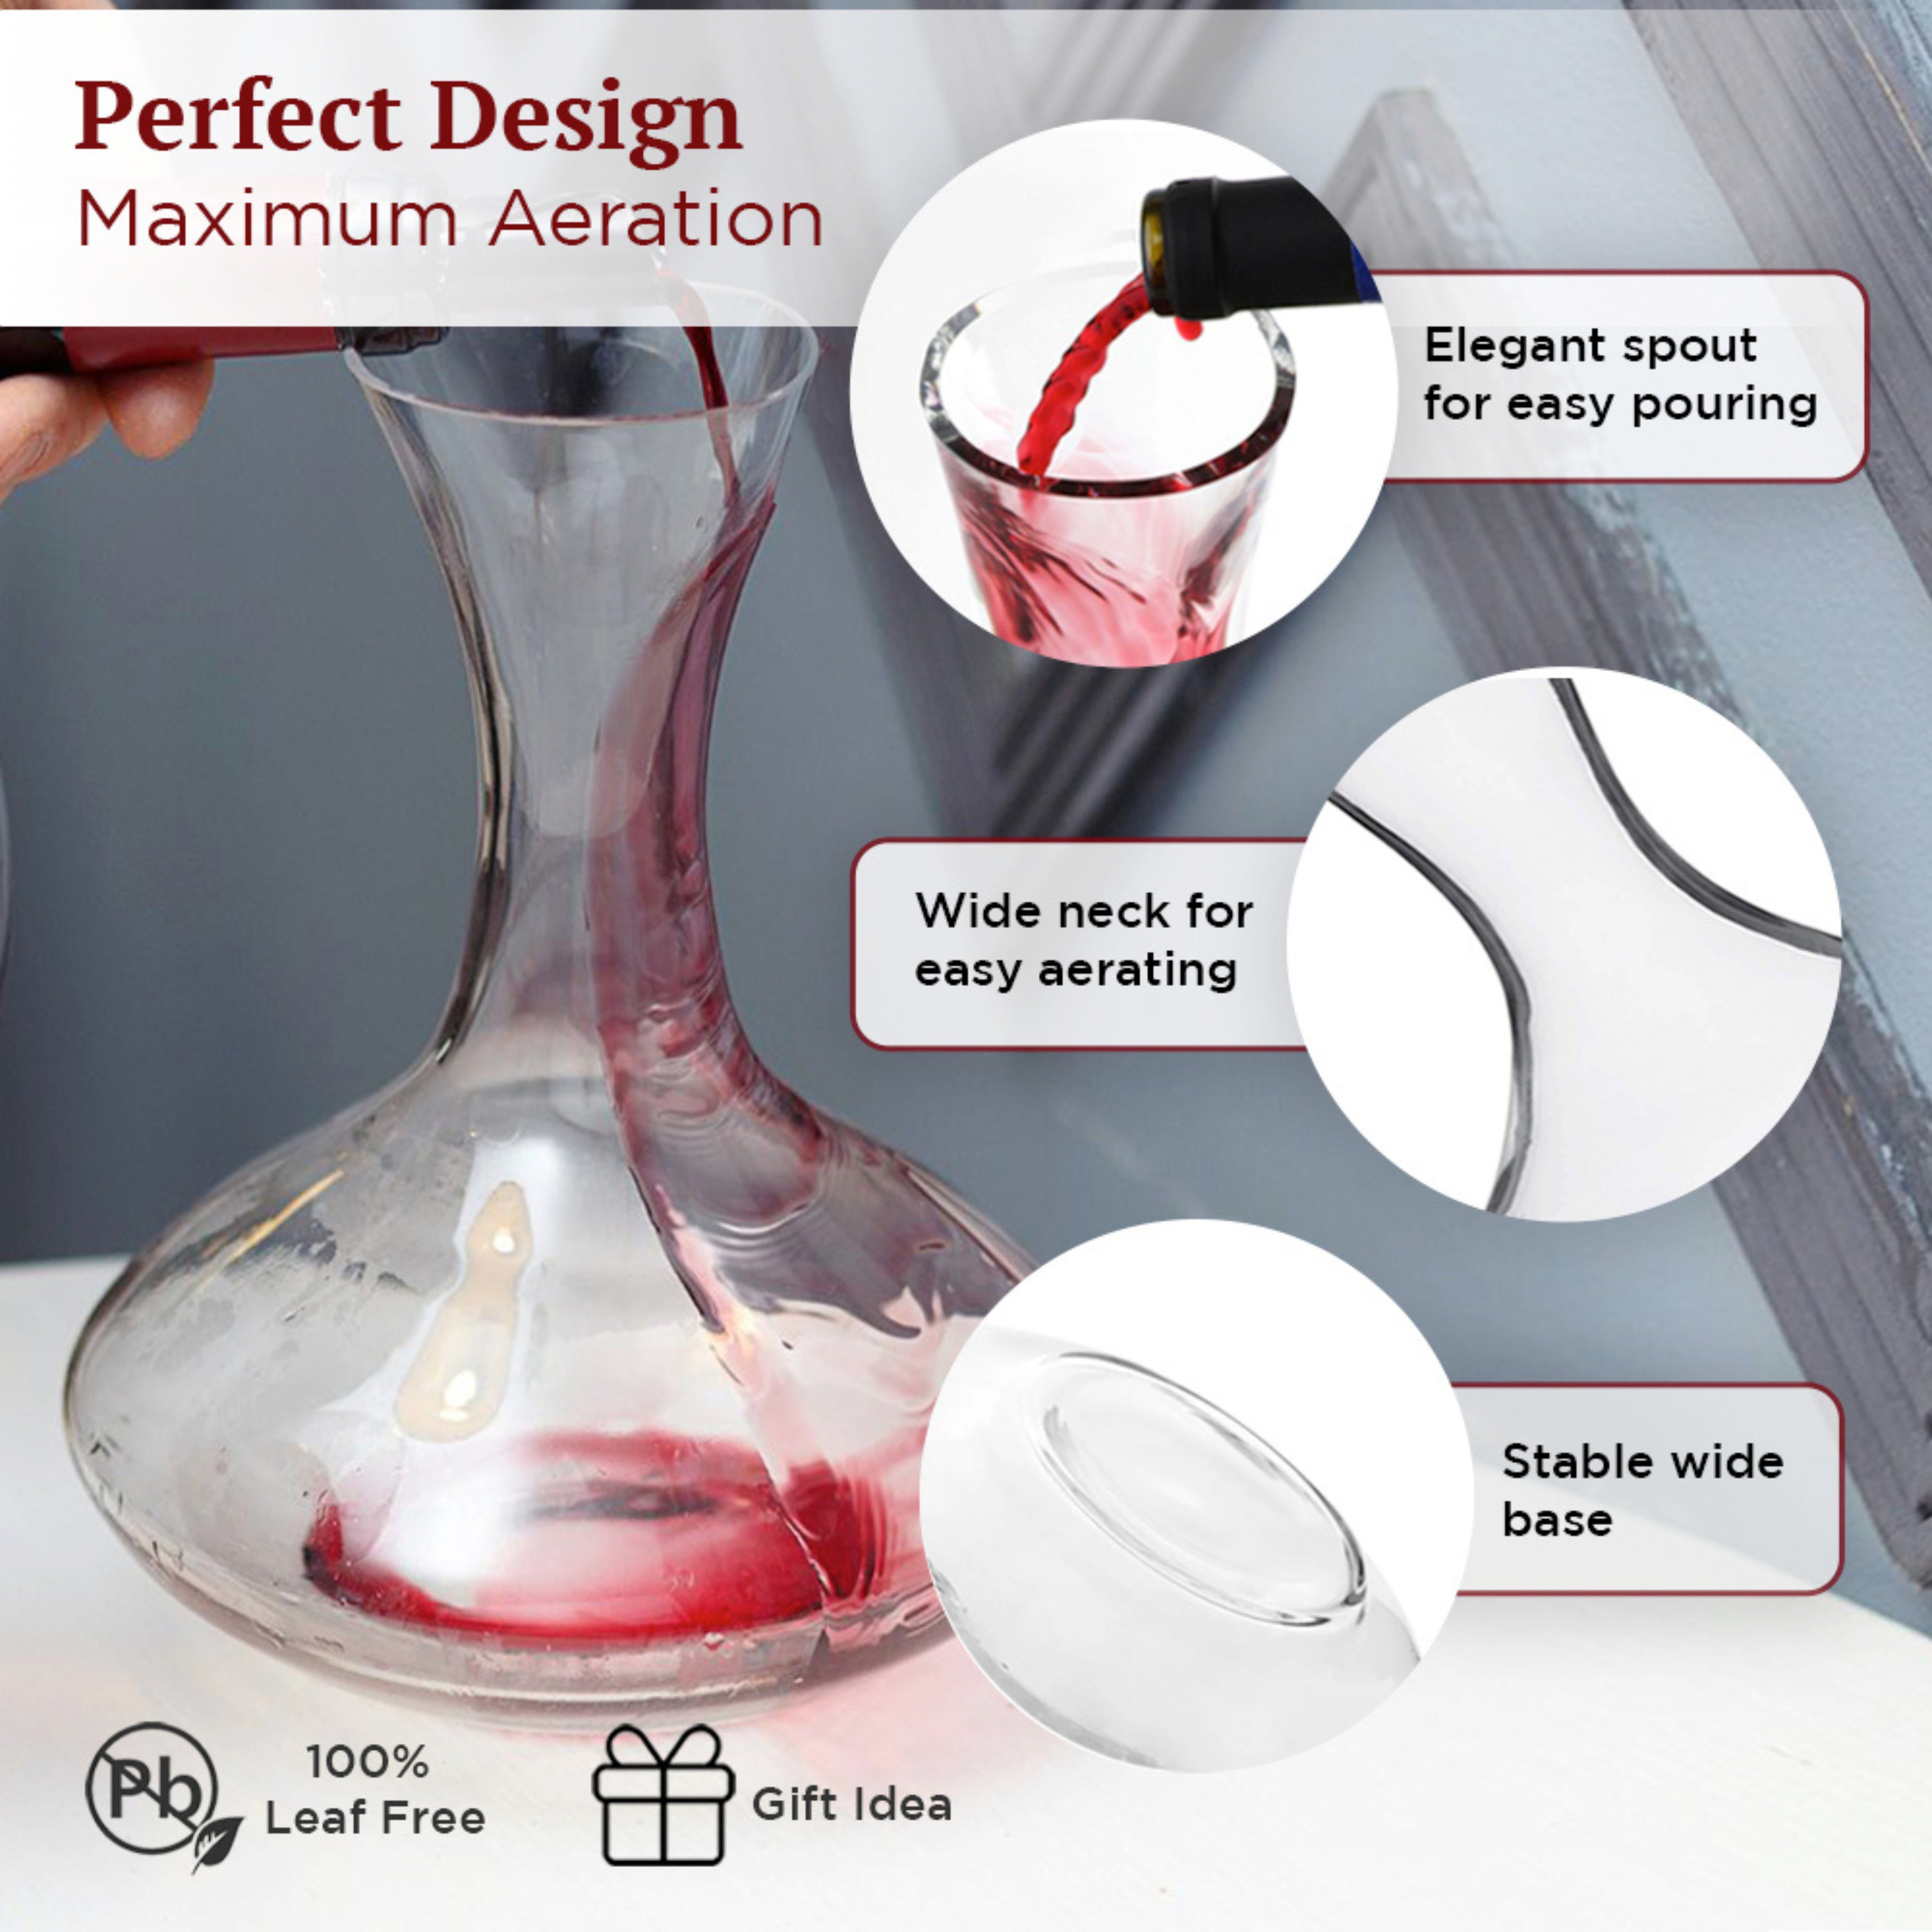 Glass Decanter for Wine - 1.4 Litres